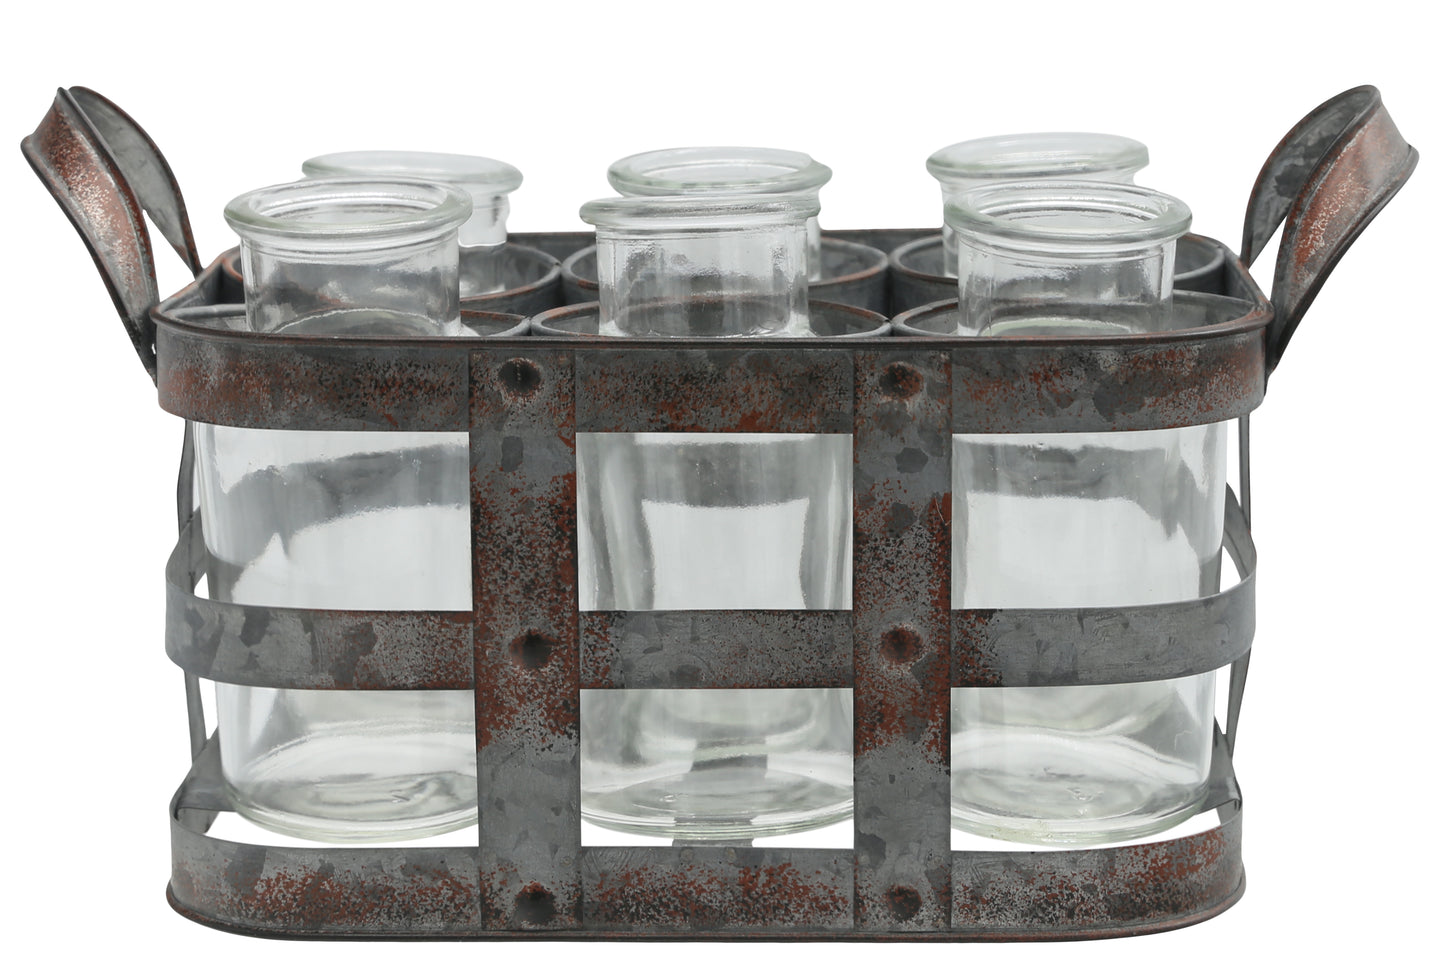 Metal Bud Vase Holder with Side Handles and 6 Clear Round Bottles Tarnished Finish Gray